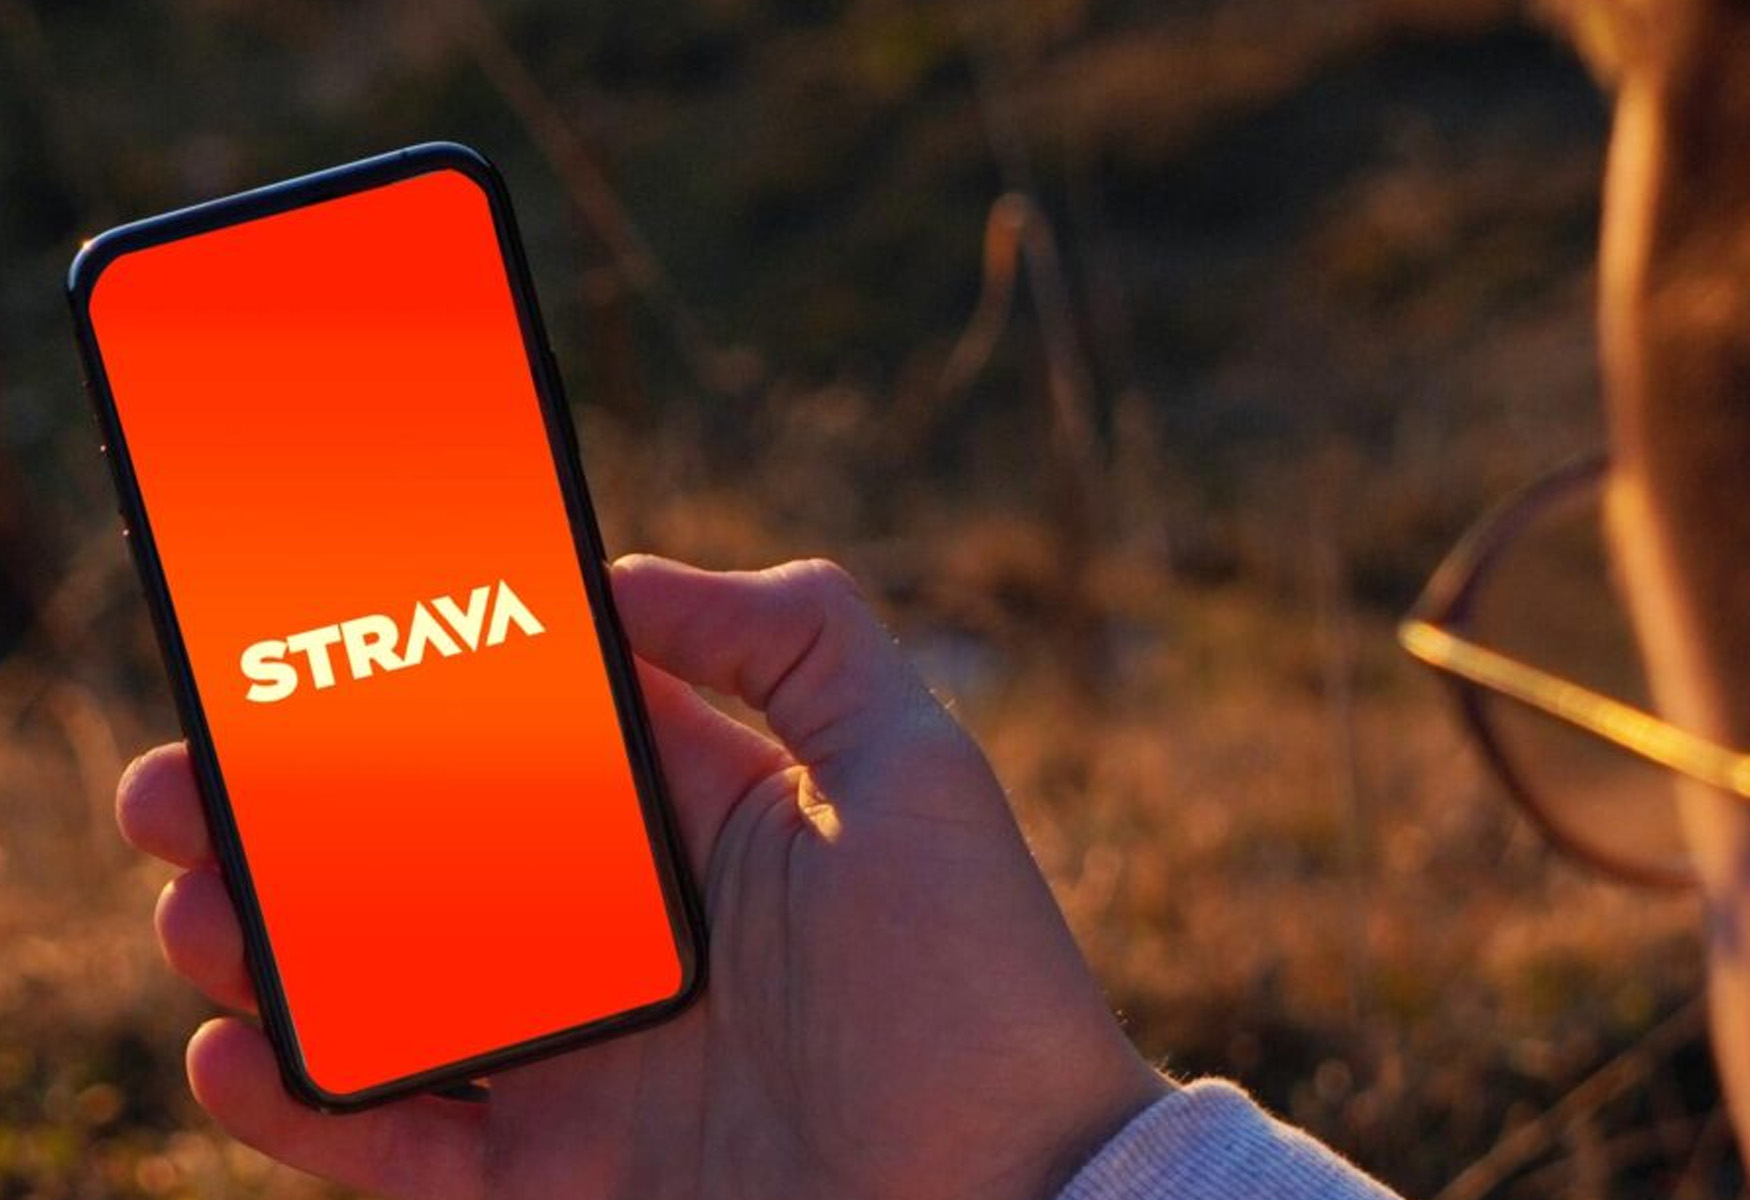 strava-introduces-in-app-messaging-to-enhance-social-networking-experience